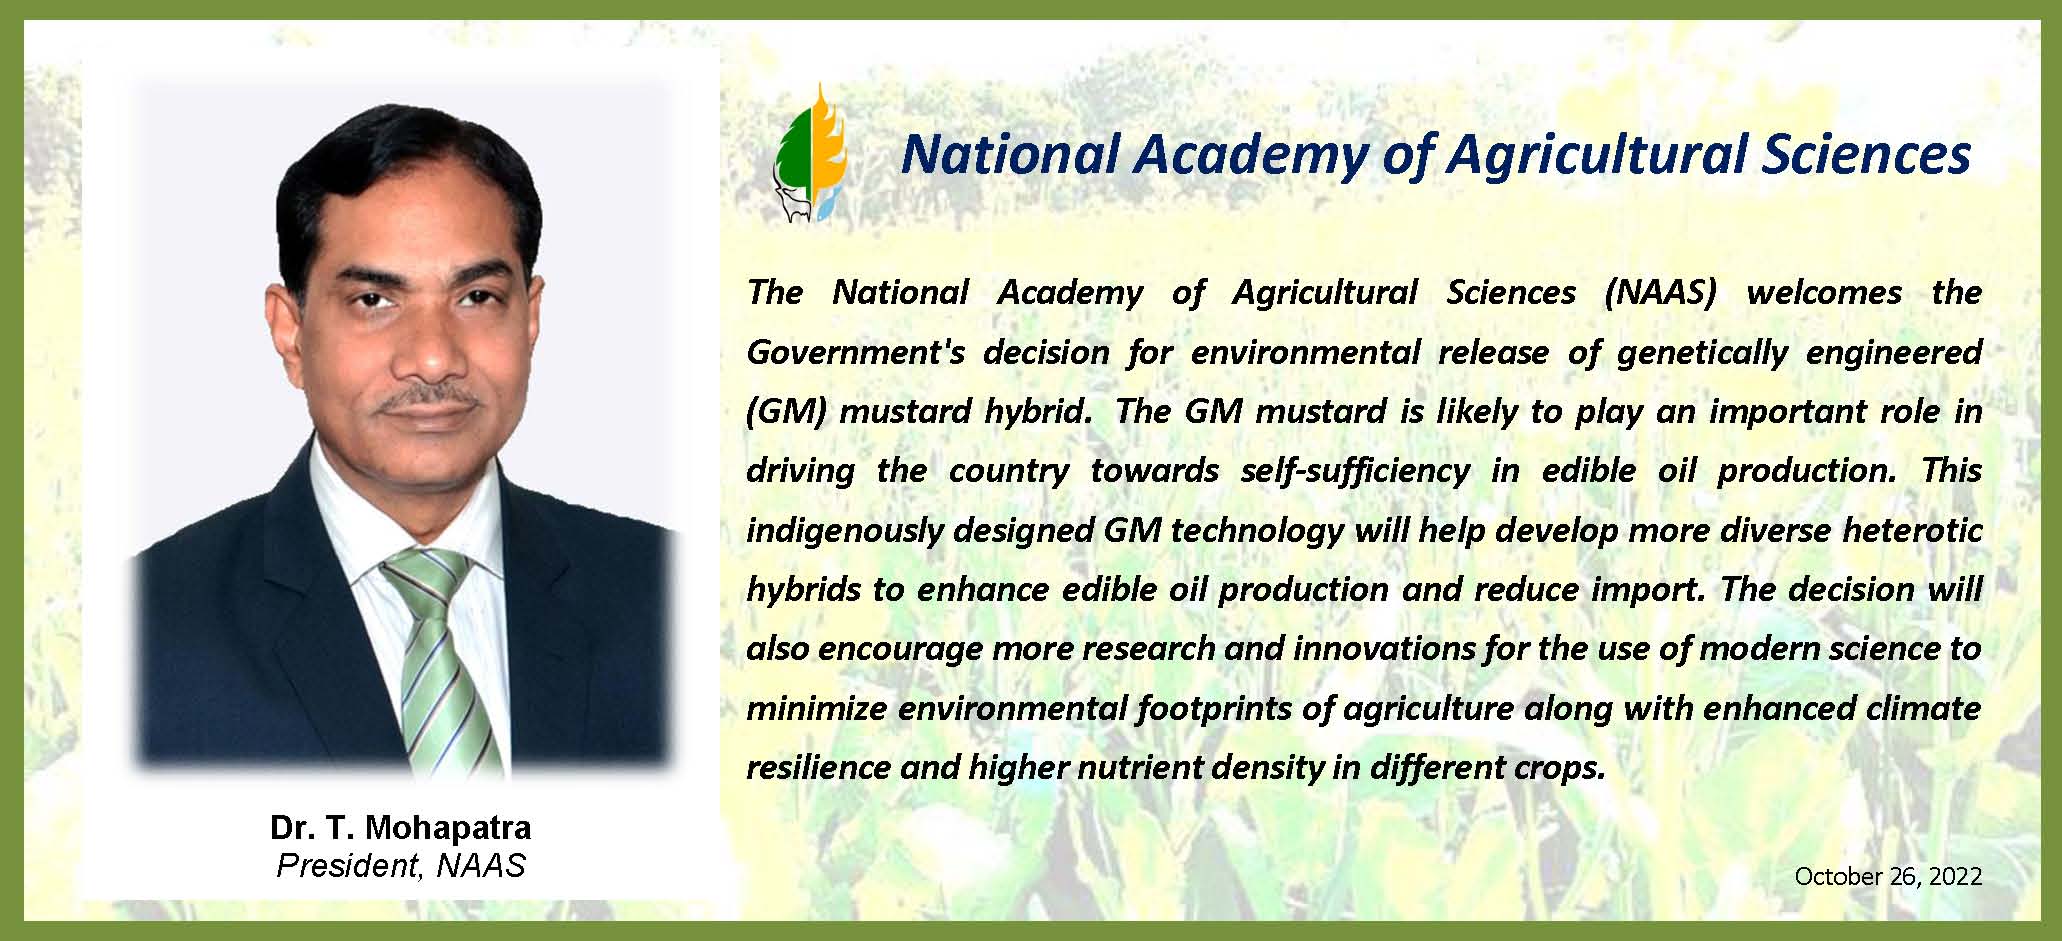 The Academy welcomes the Government's decision for environmental release of GM mustard hybrid